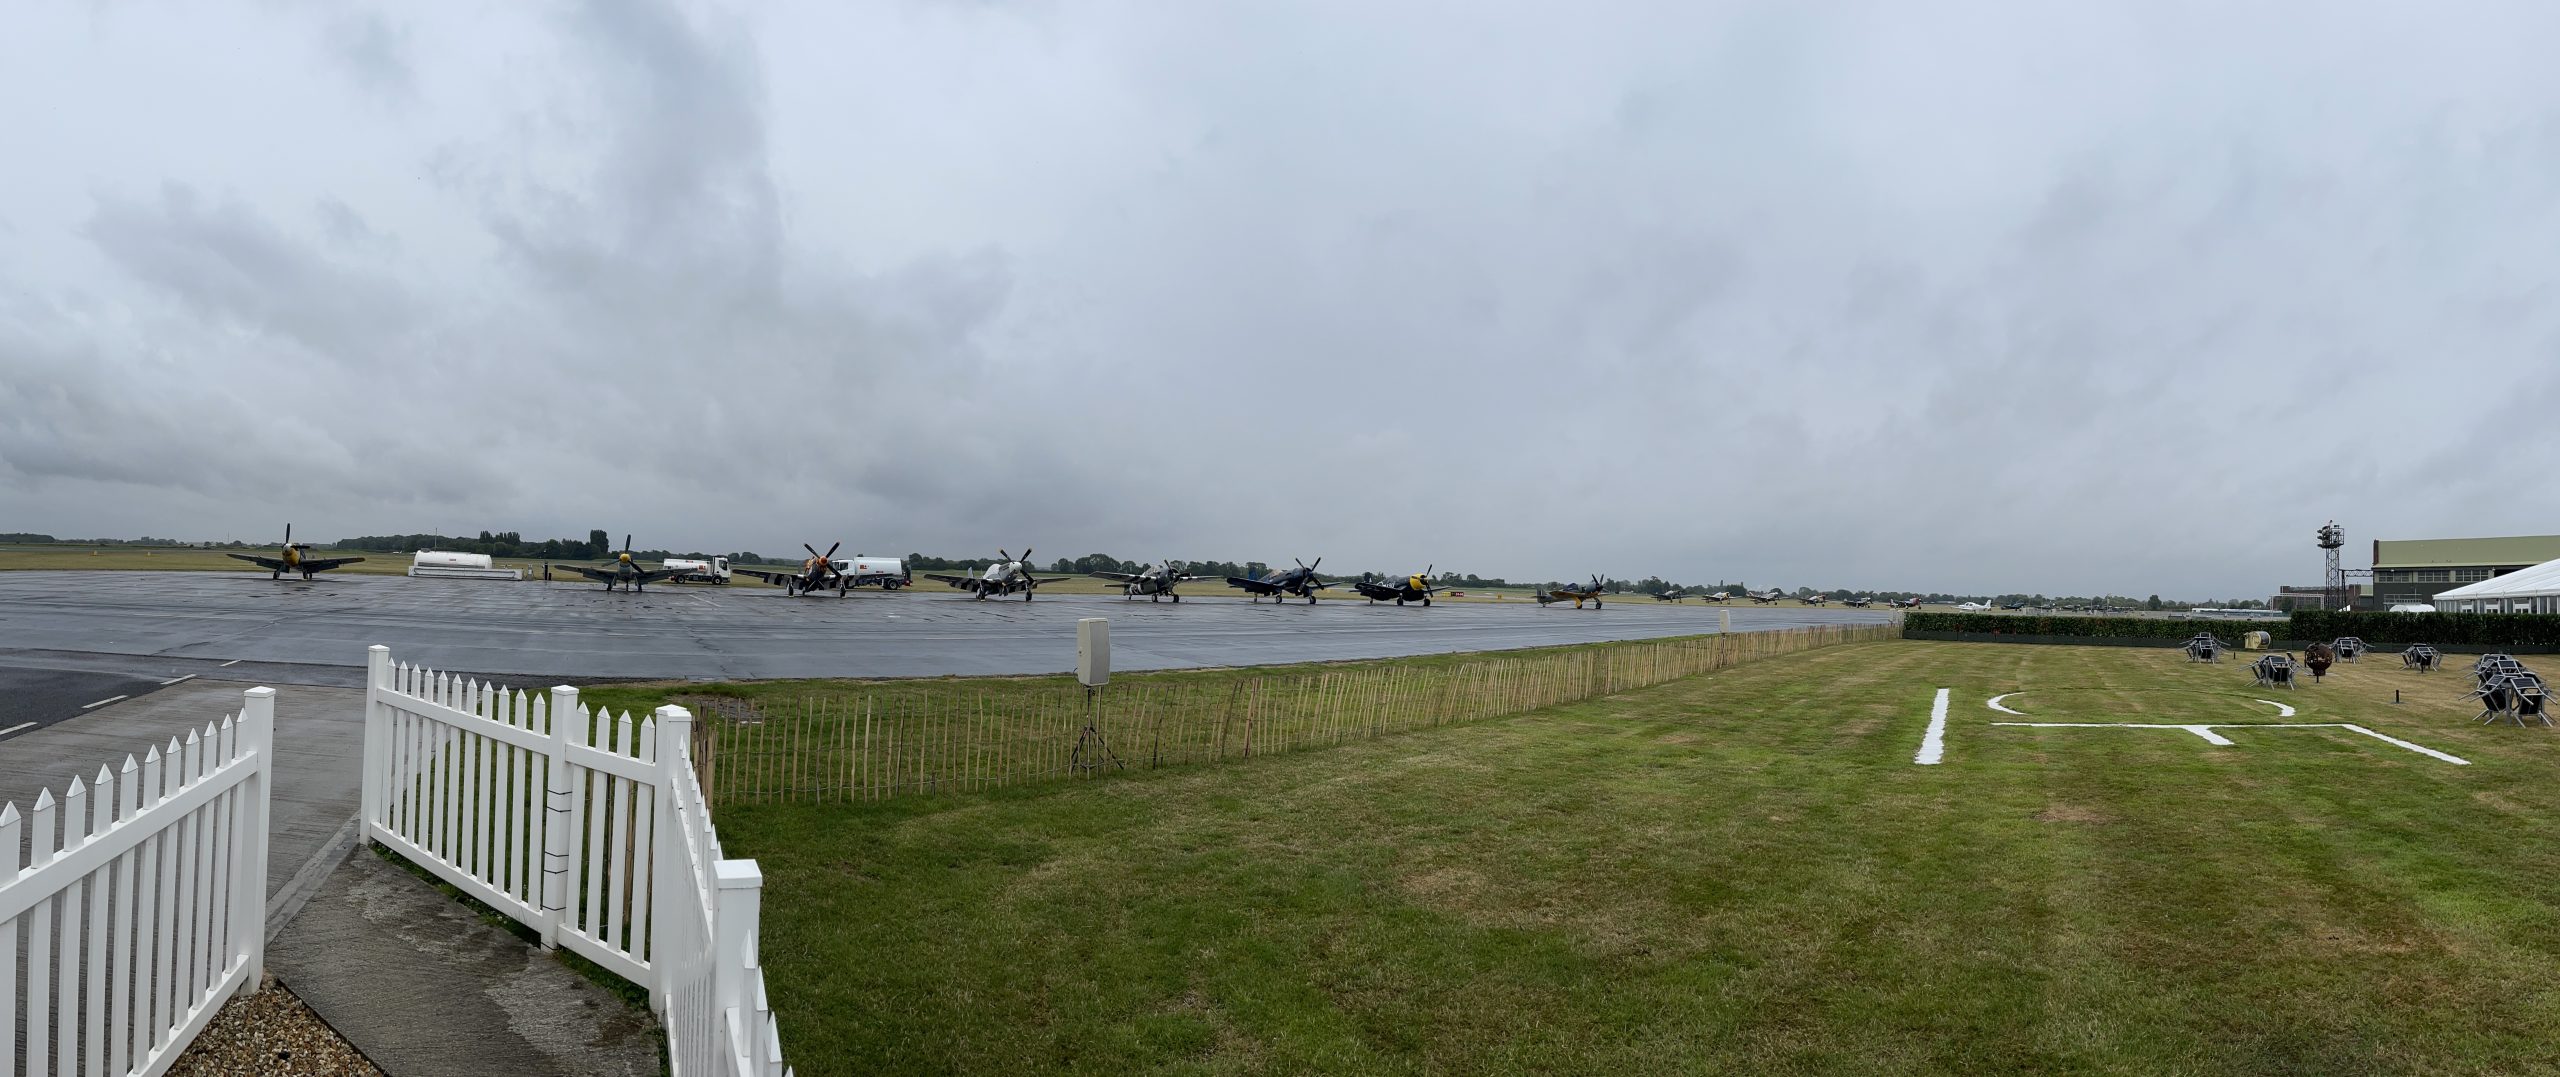 The Flying Legends are ready to go!